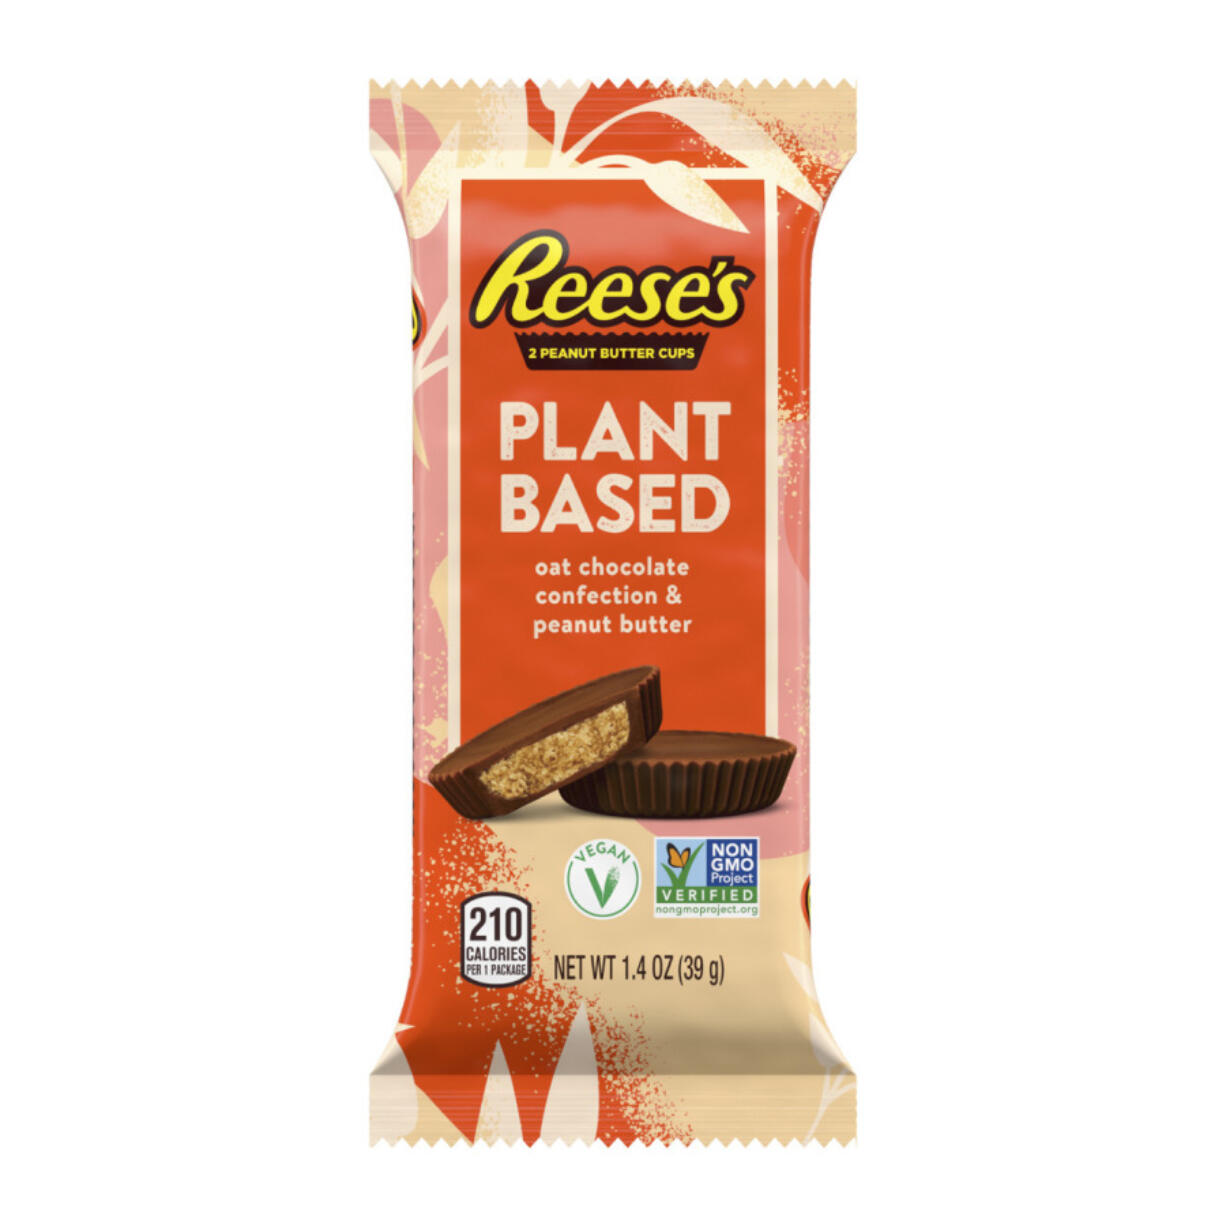 This image provided by The Hershey Company shows the company's new plant-based Reese's peanut butter cups. Hershey said Tuesday, March 7, 2023, that Reese's plant-based peanut butter cups will be its first plant-based chocolate sold nationally when they go on sale in March. A second vegan offering, Hershey's plant-based extra creamy with almonds and sea salt, will follow in April.